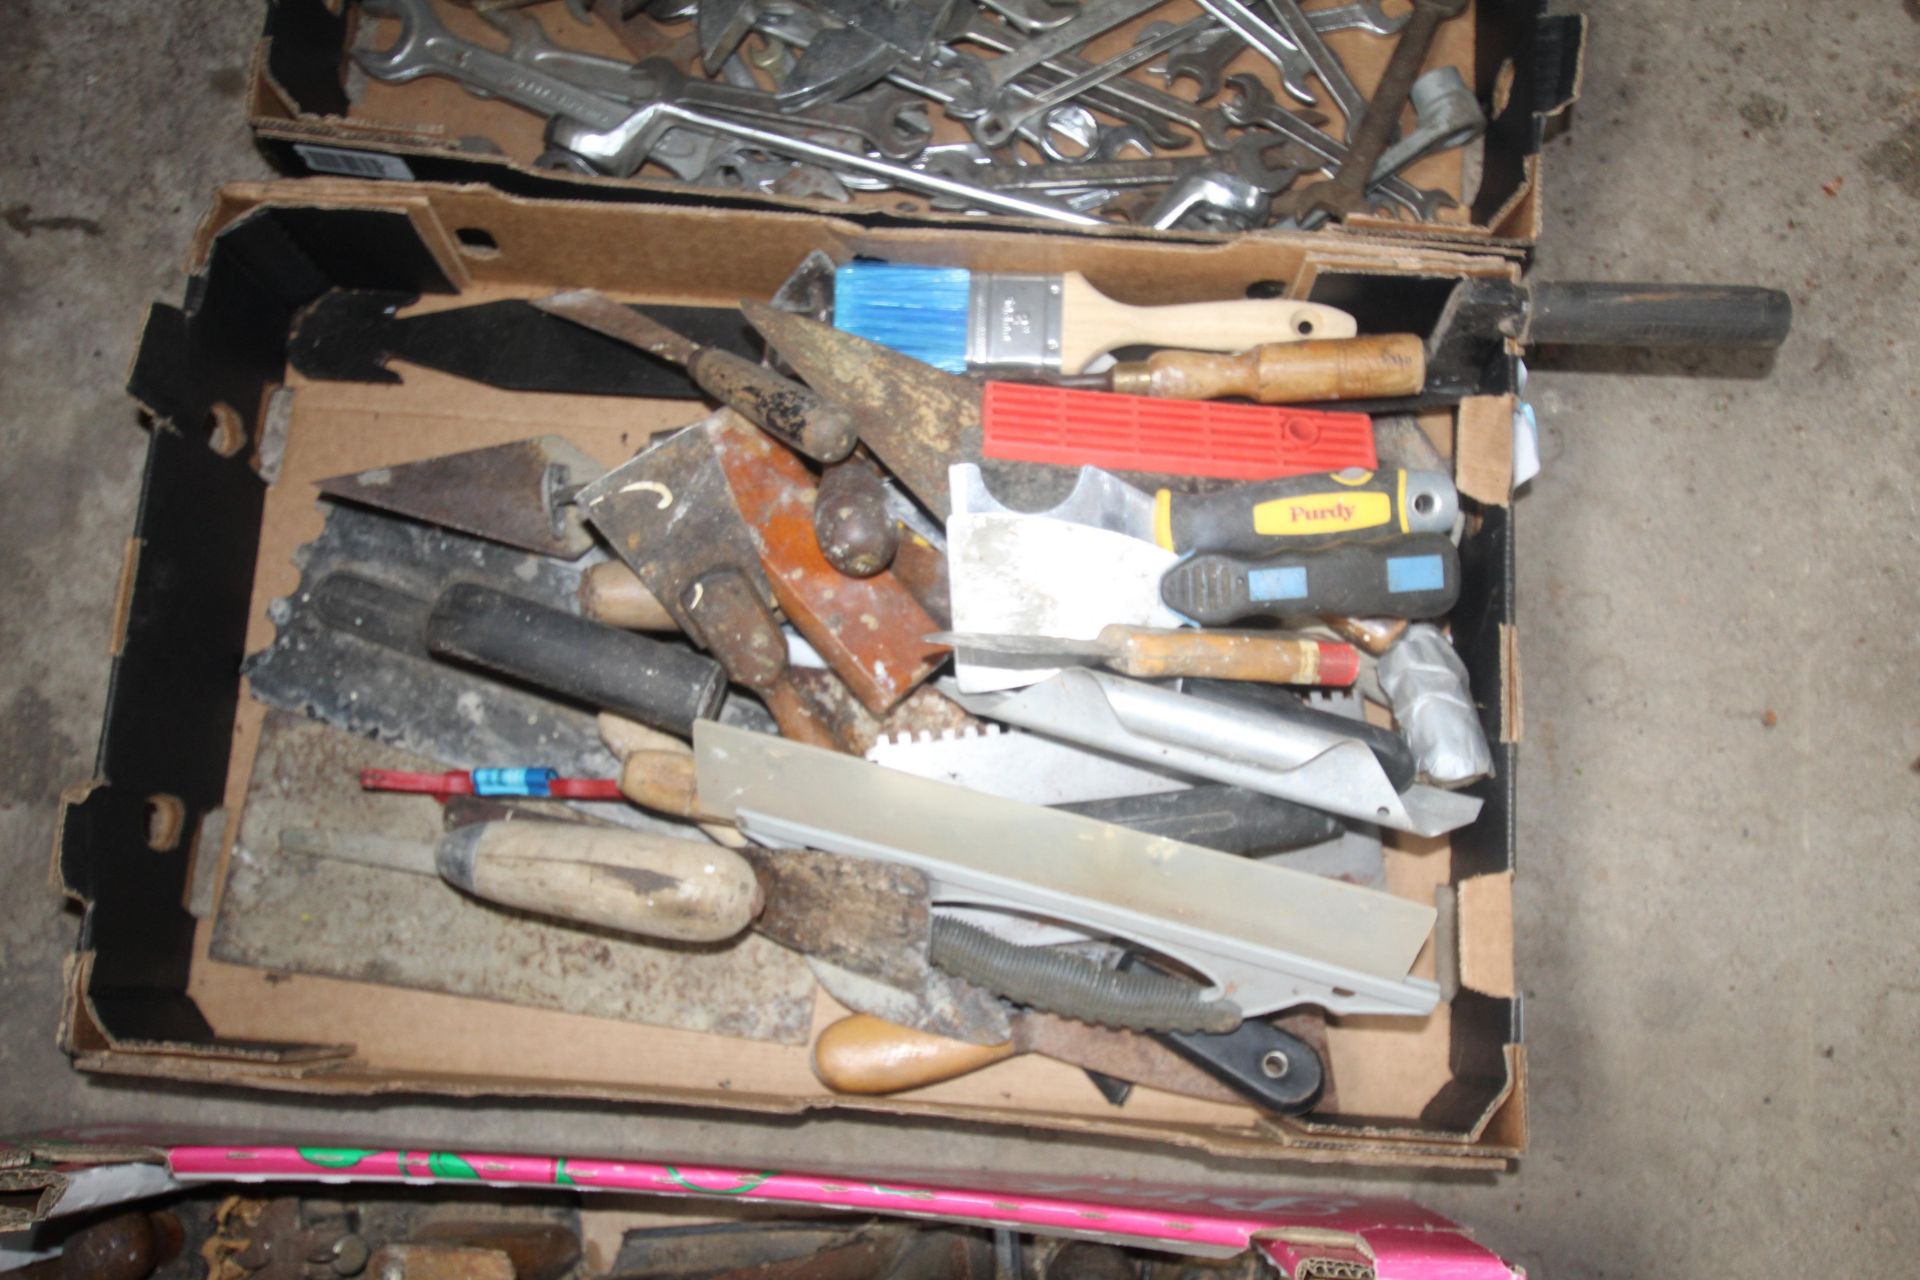 Tray of various scrapers, plasterers floats etc.